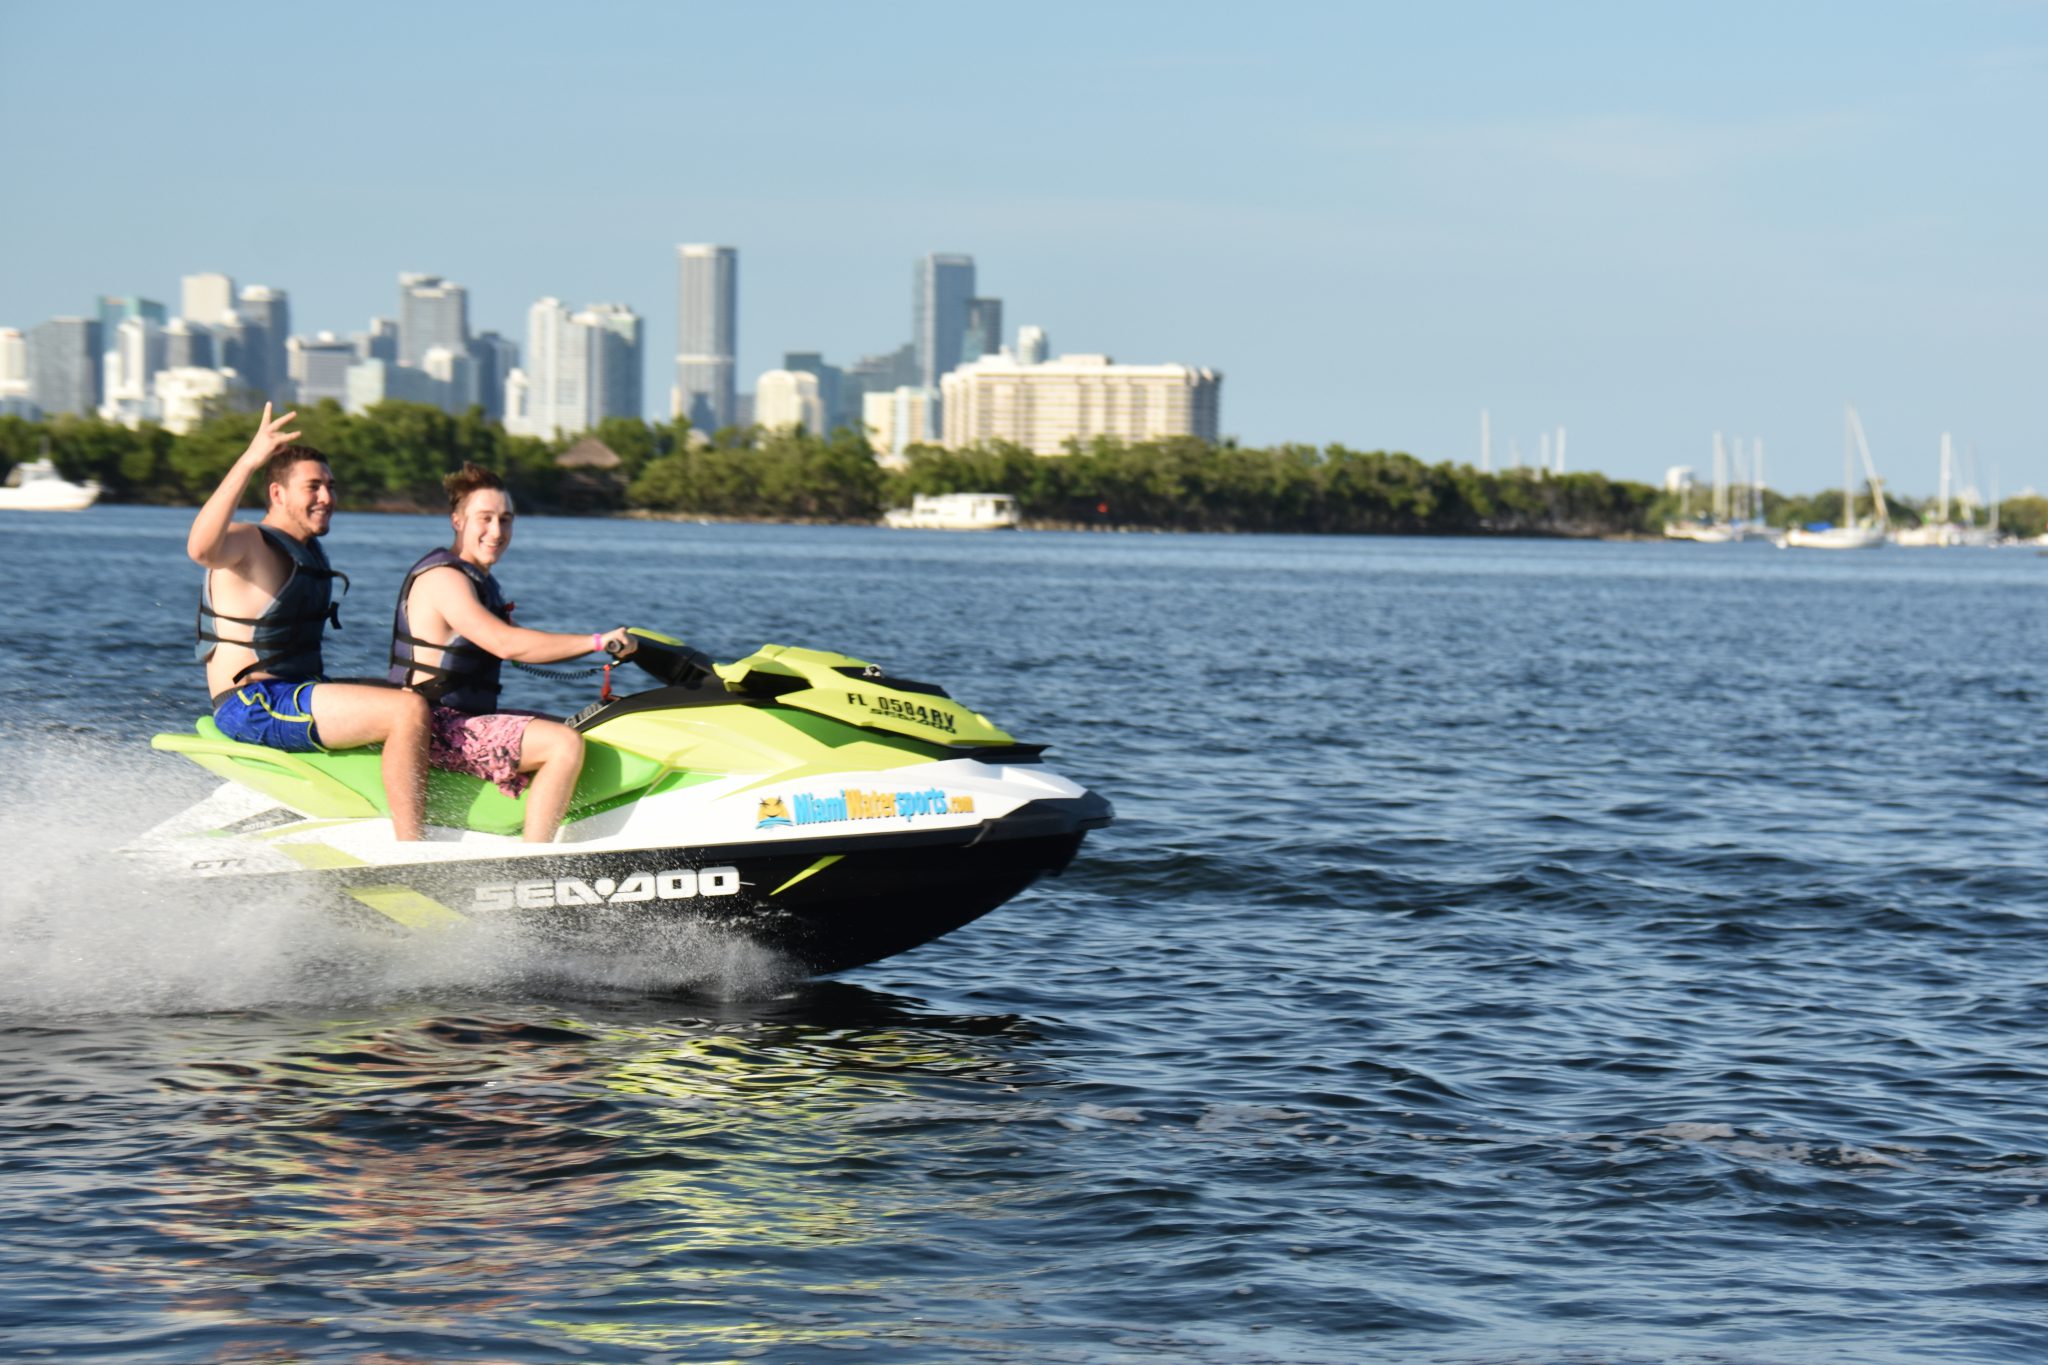 Jet Skiing in Miami, Strategies for Avoiding Crowds